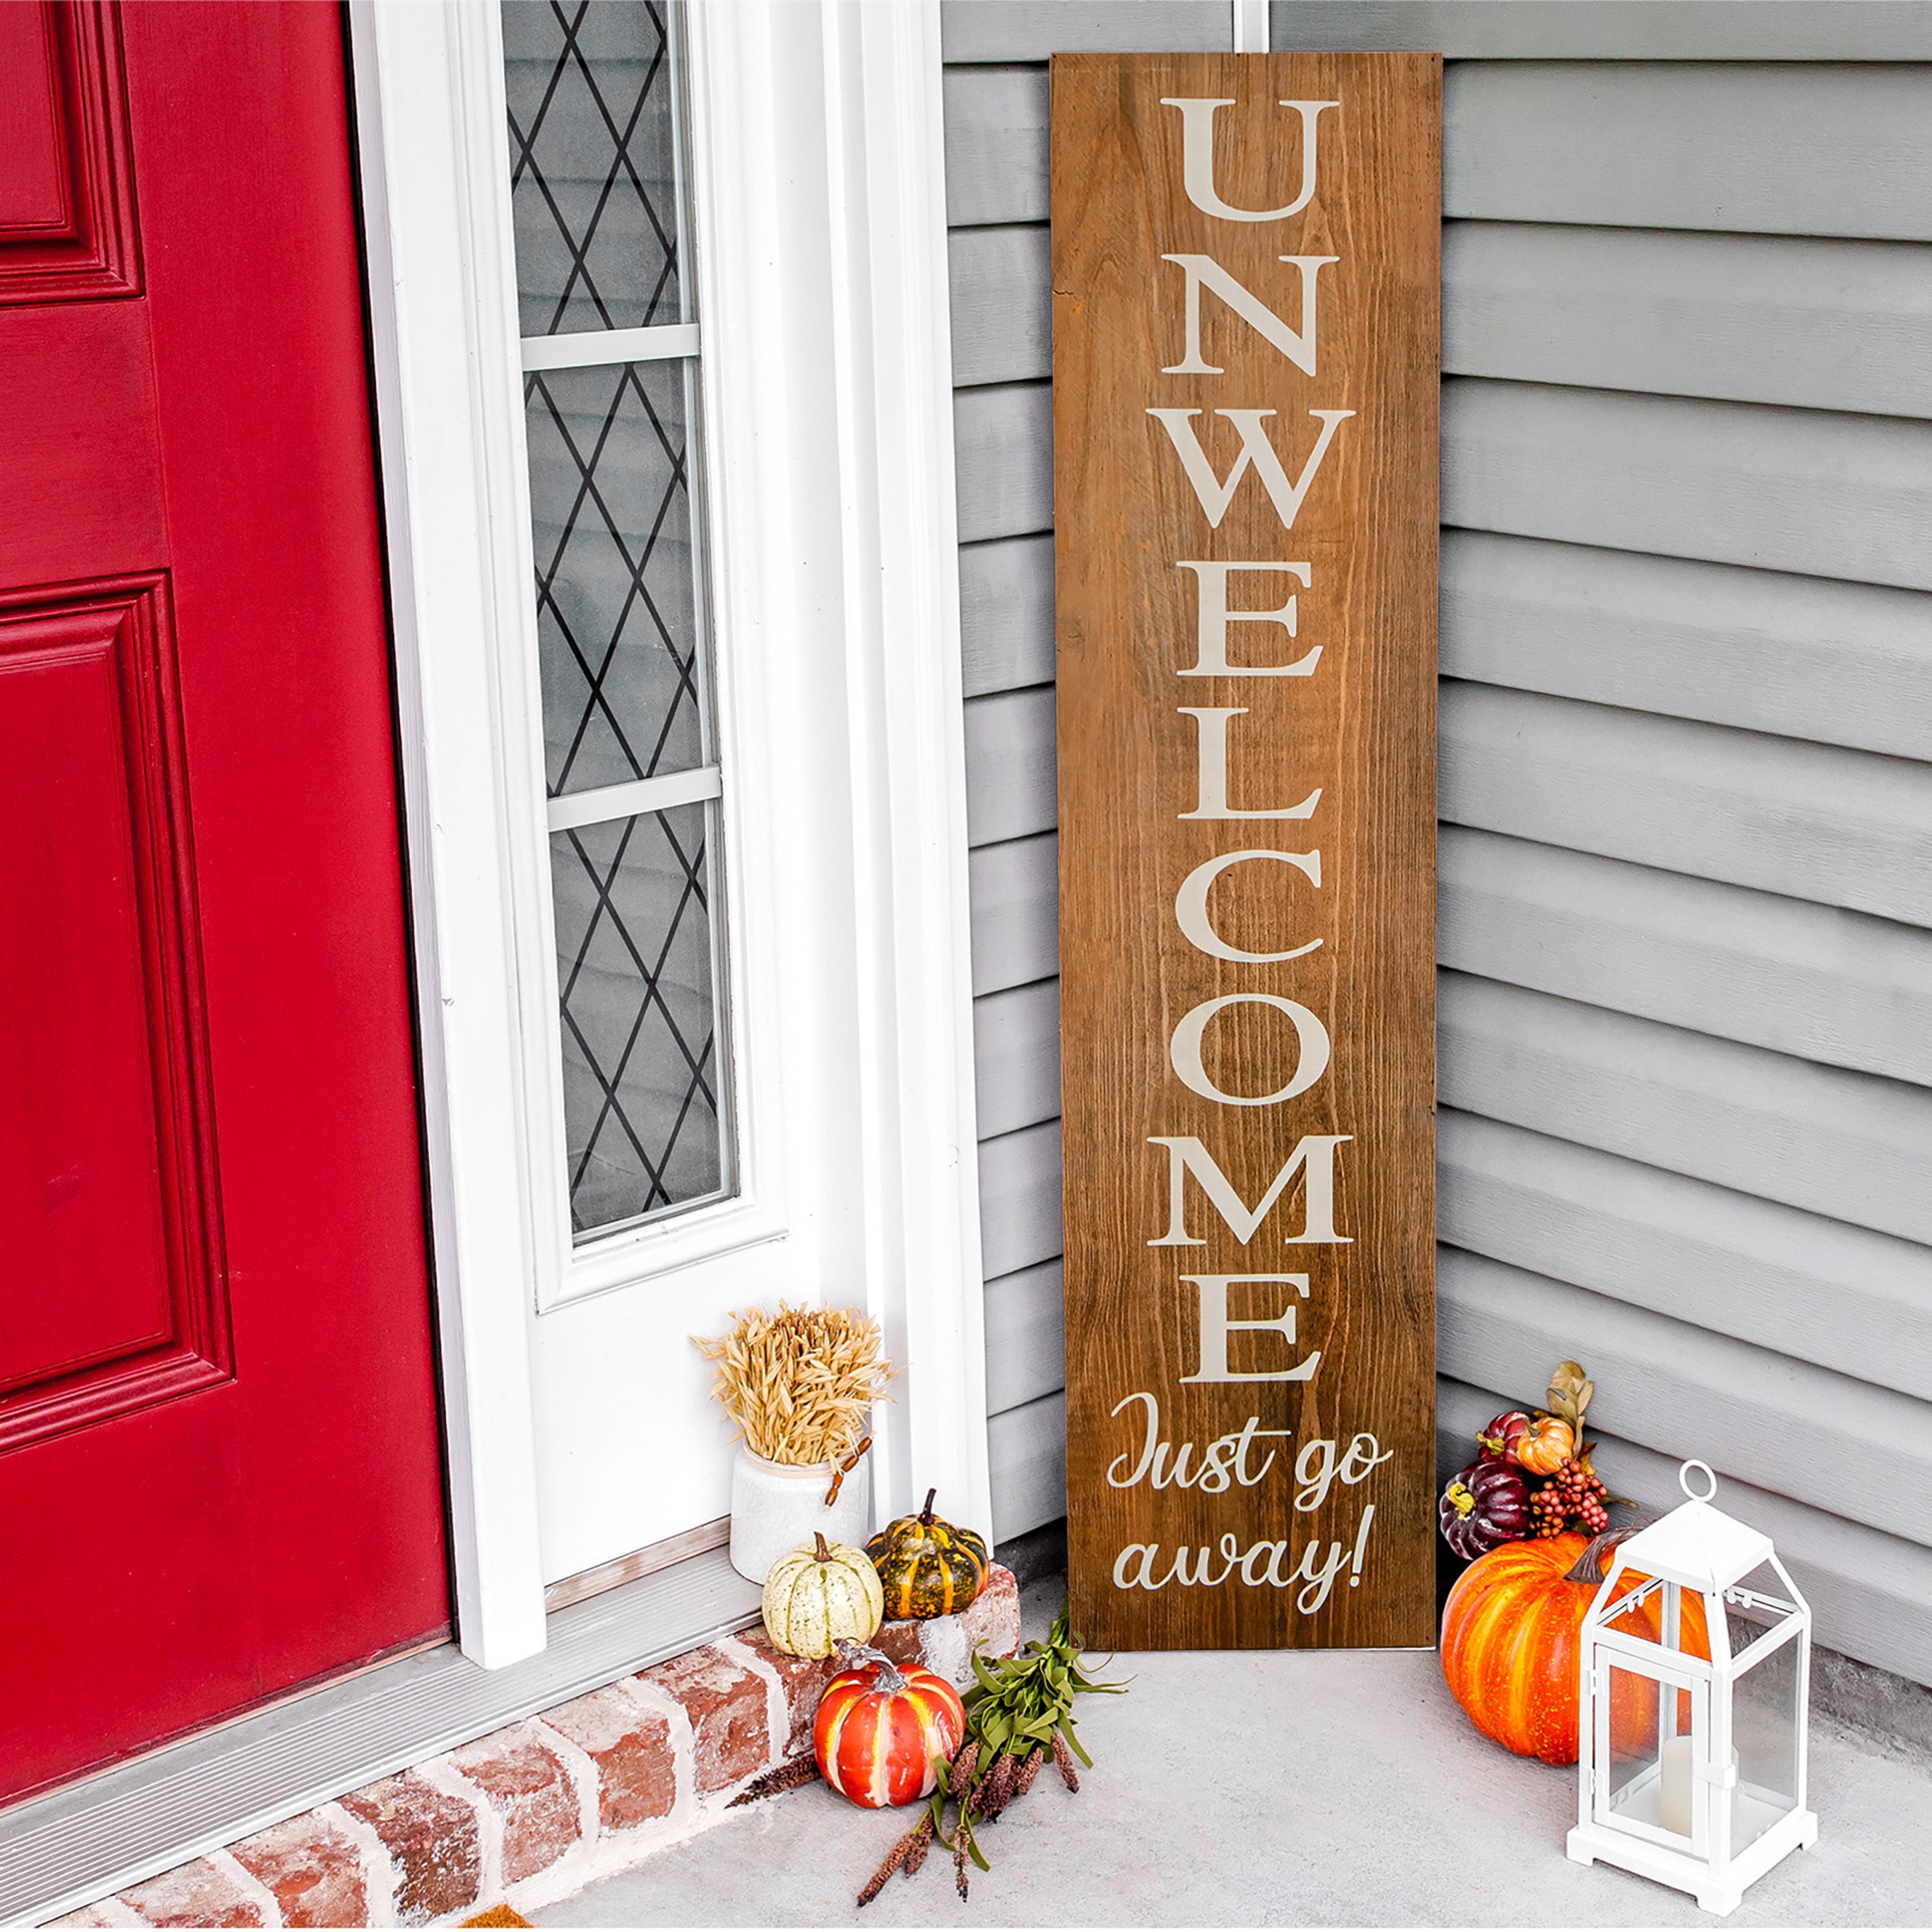 Halloween Hanging Porch Sign, Natural, 'Unwelcome, Just Go Away', Wooden Construction, 39 Inches